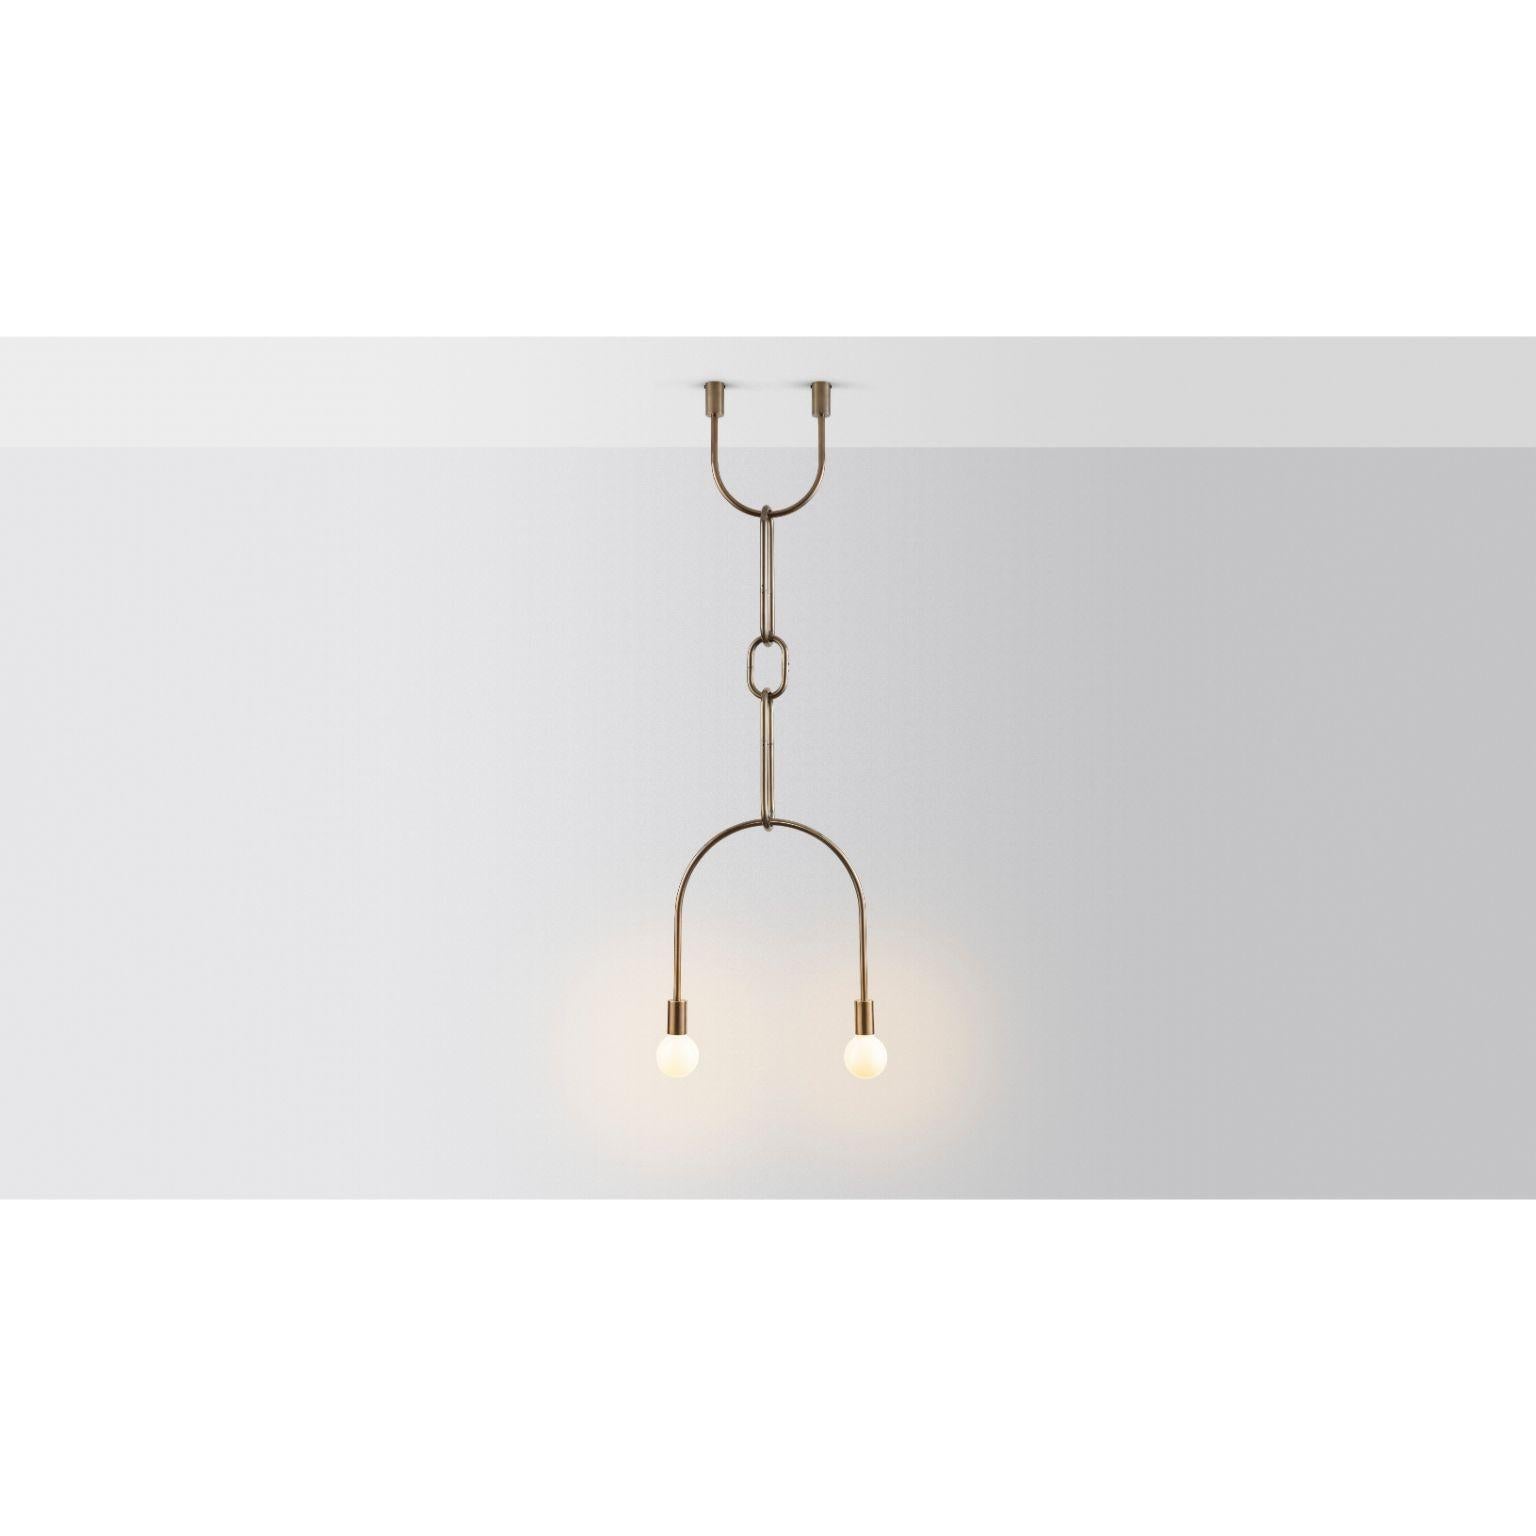 Brass chain on U by Volker Haug
Dimensions: 49.5 x H minimum 108 cm
Materials: Brass
Finish: Raw, satin lacquer
Weight: approx 4kg

Lamp: E27, Frosted or Opal LED G95 or G125
  

The U Chain series hangs with gravity and a sense of